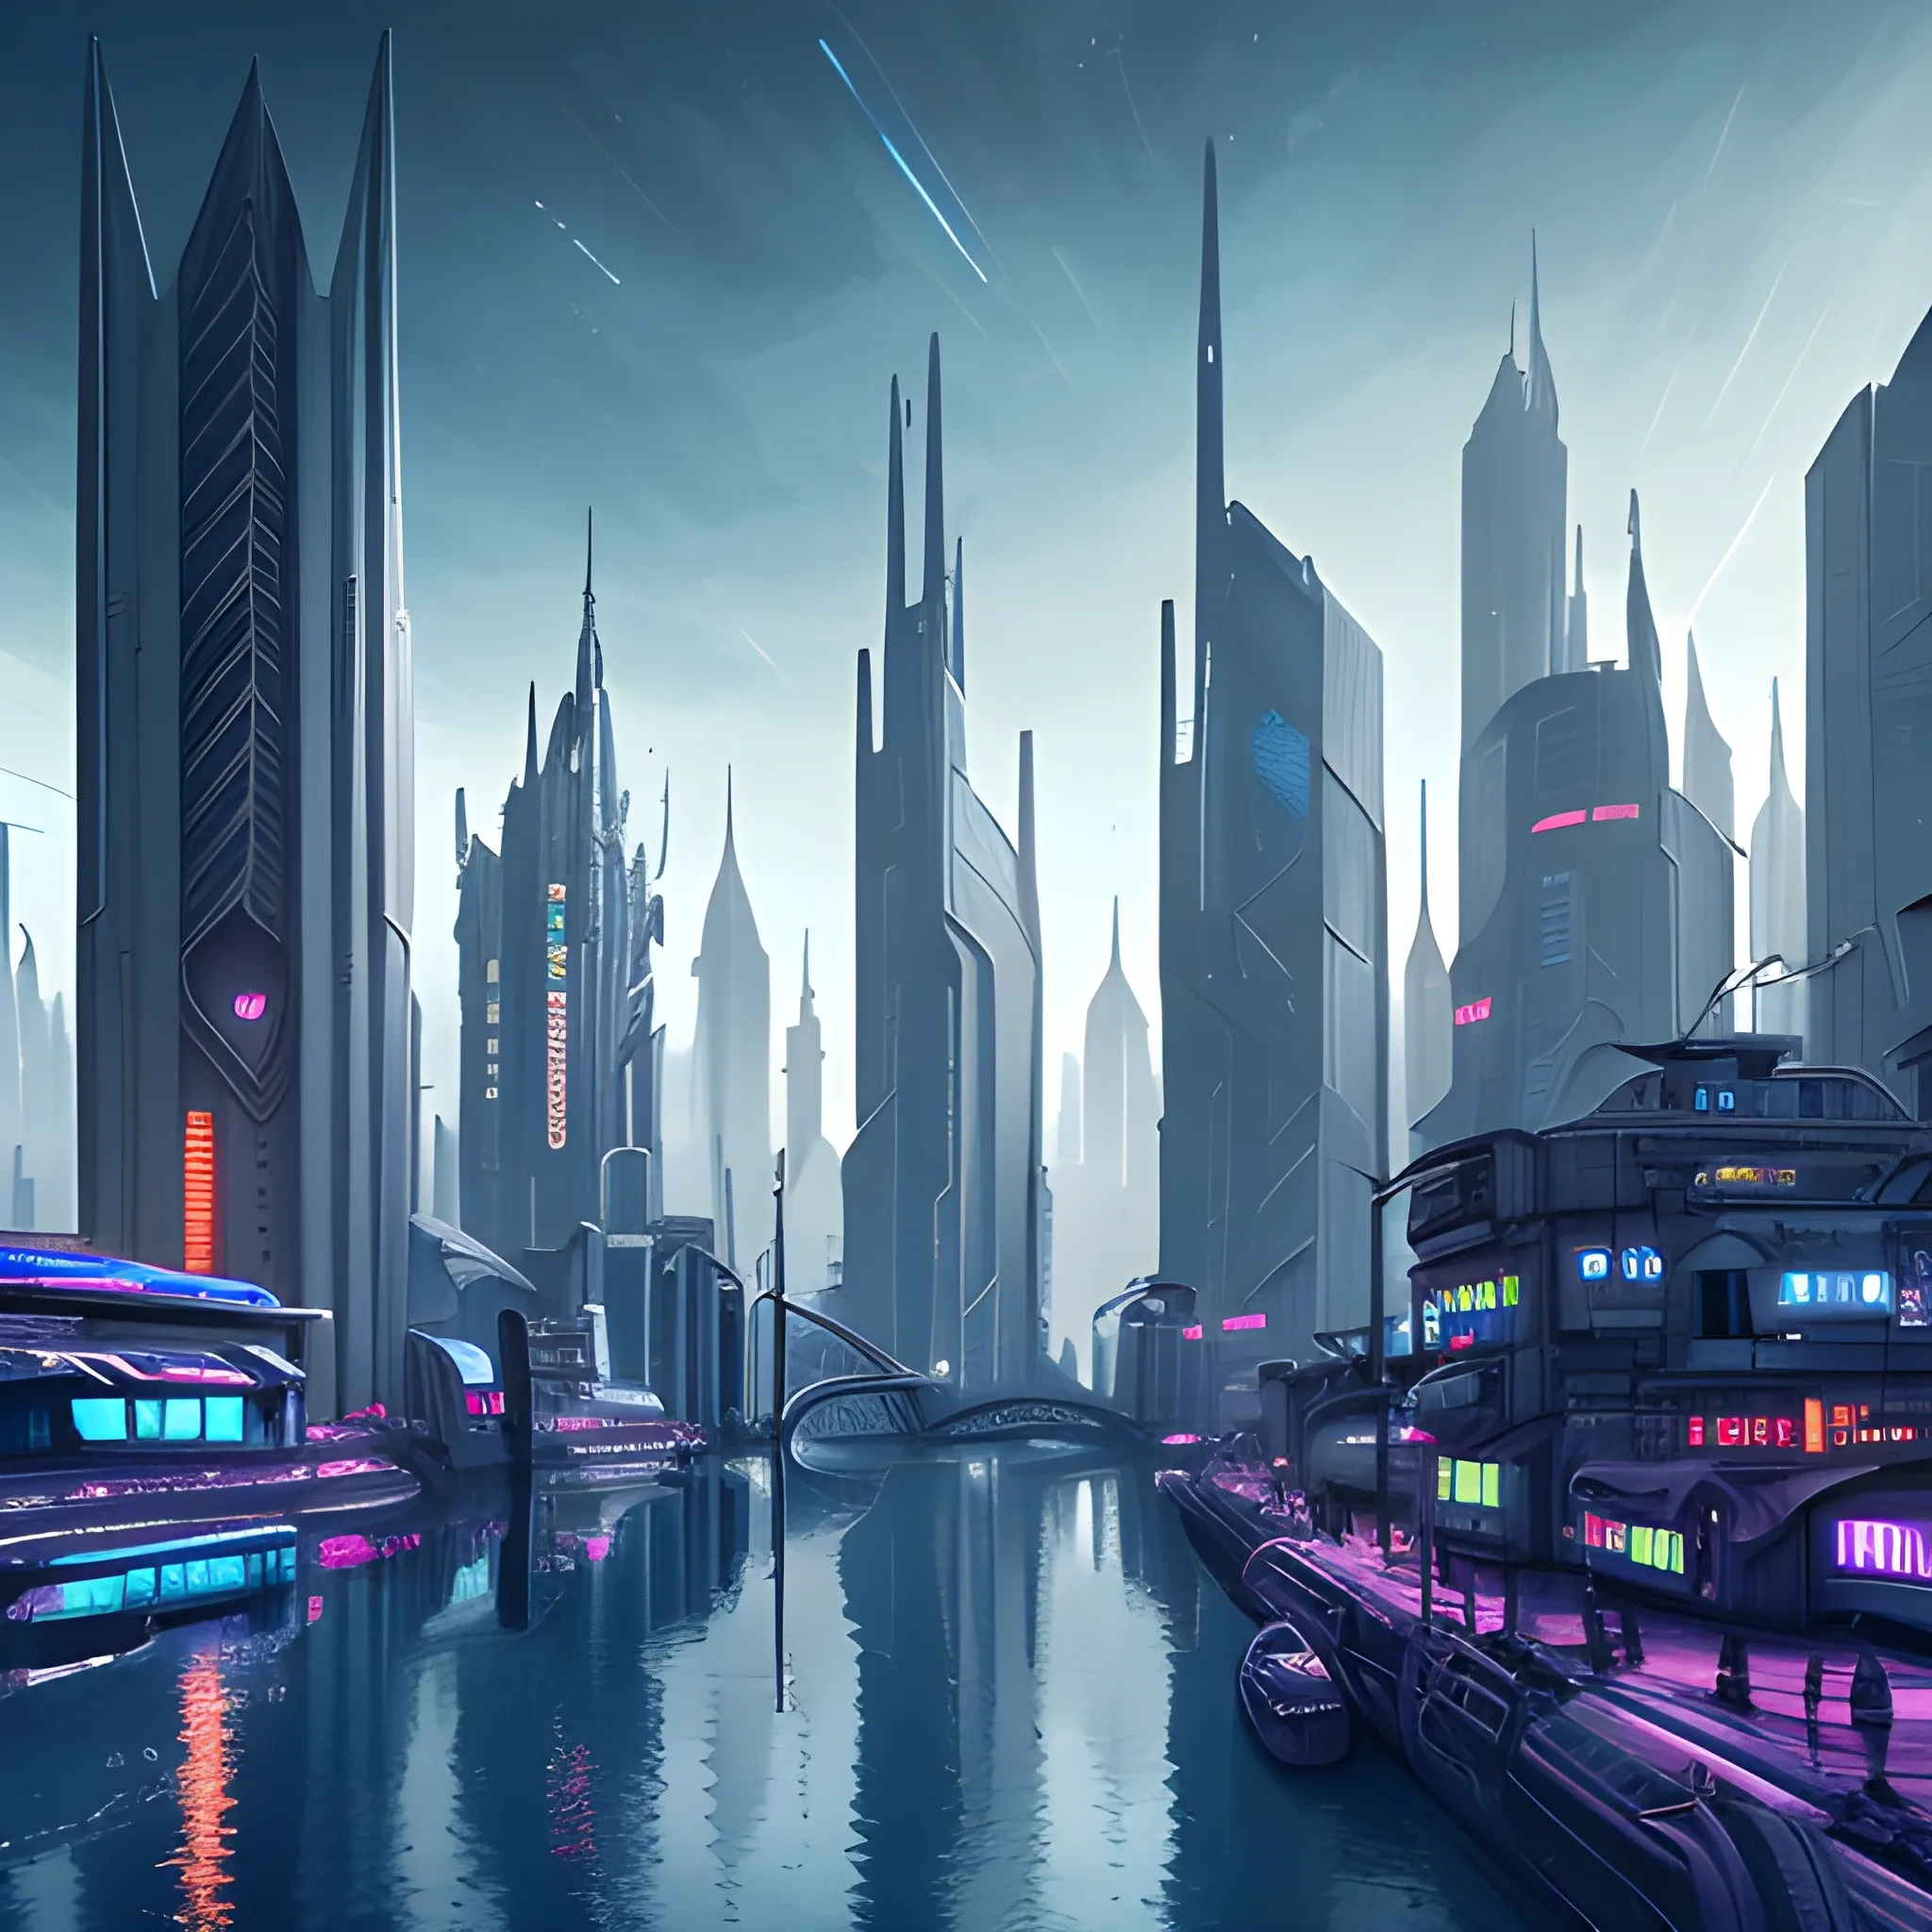 Main space city with spire style buildings, cyberpunk style blue tones, cityscape of bridges and canals, surreal, ultra high quality
